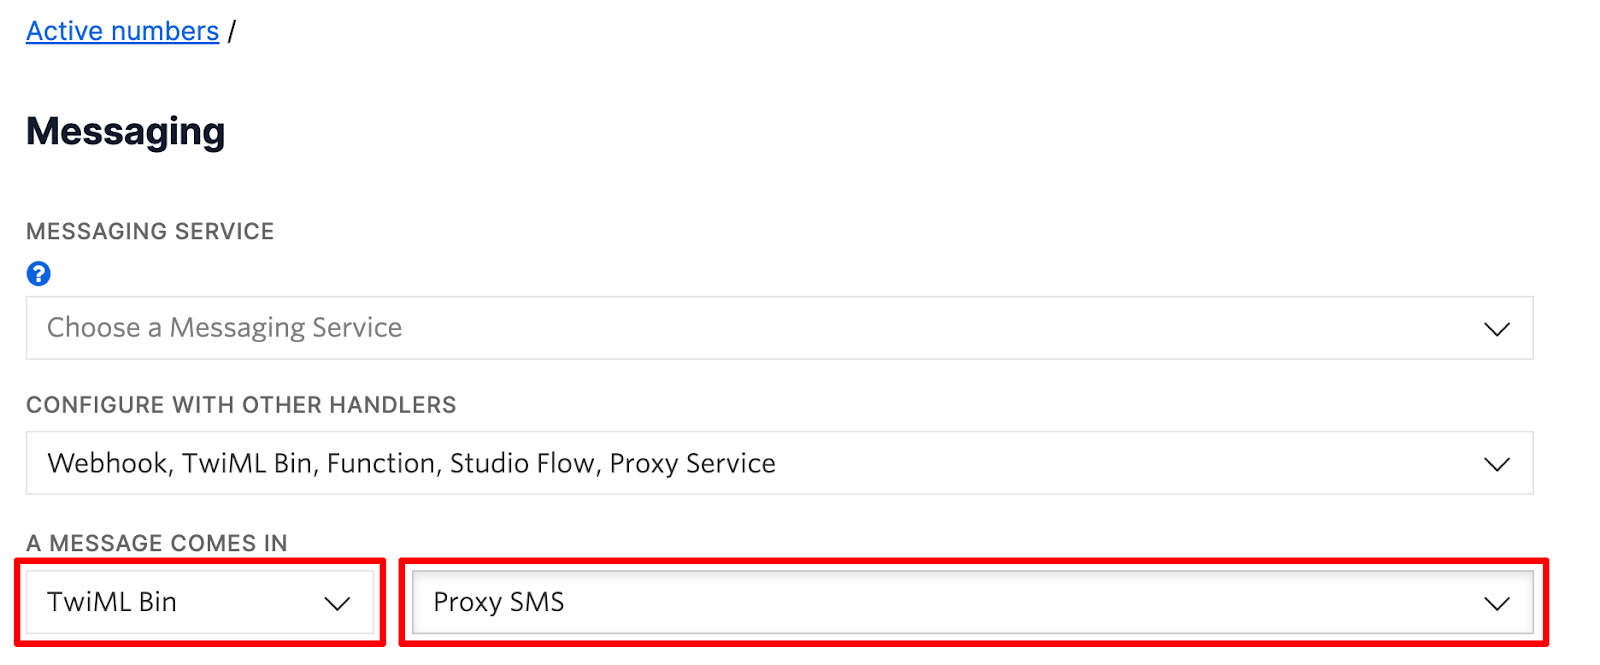 Configure Twilio Phone Number to respond with the "Proxy SMS" TwiML bin when a message comes in